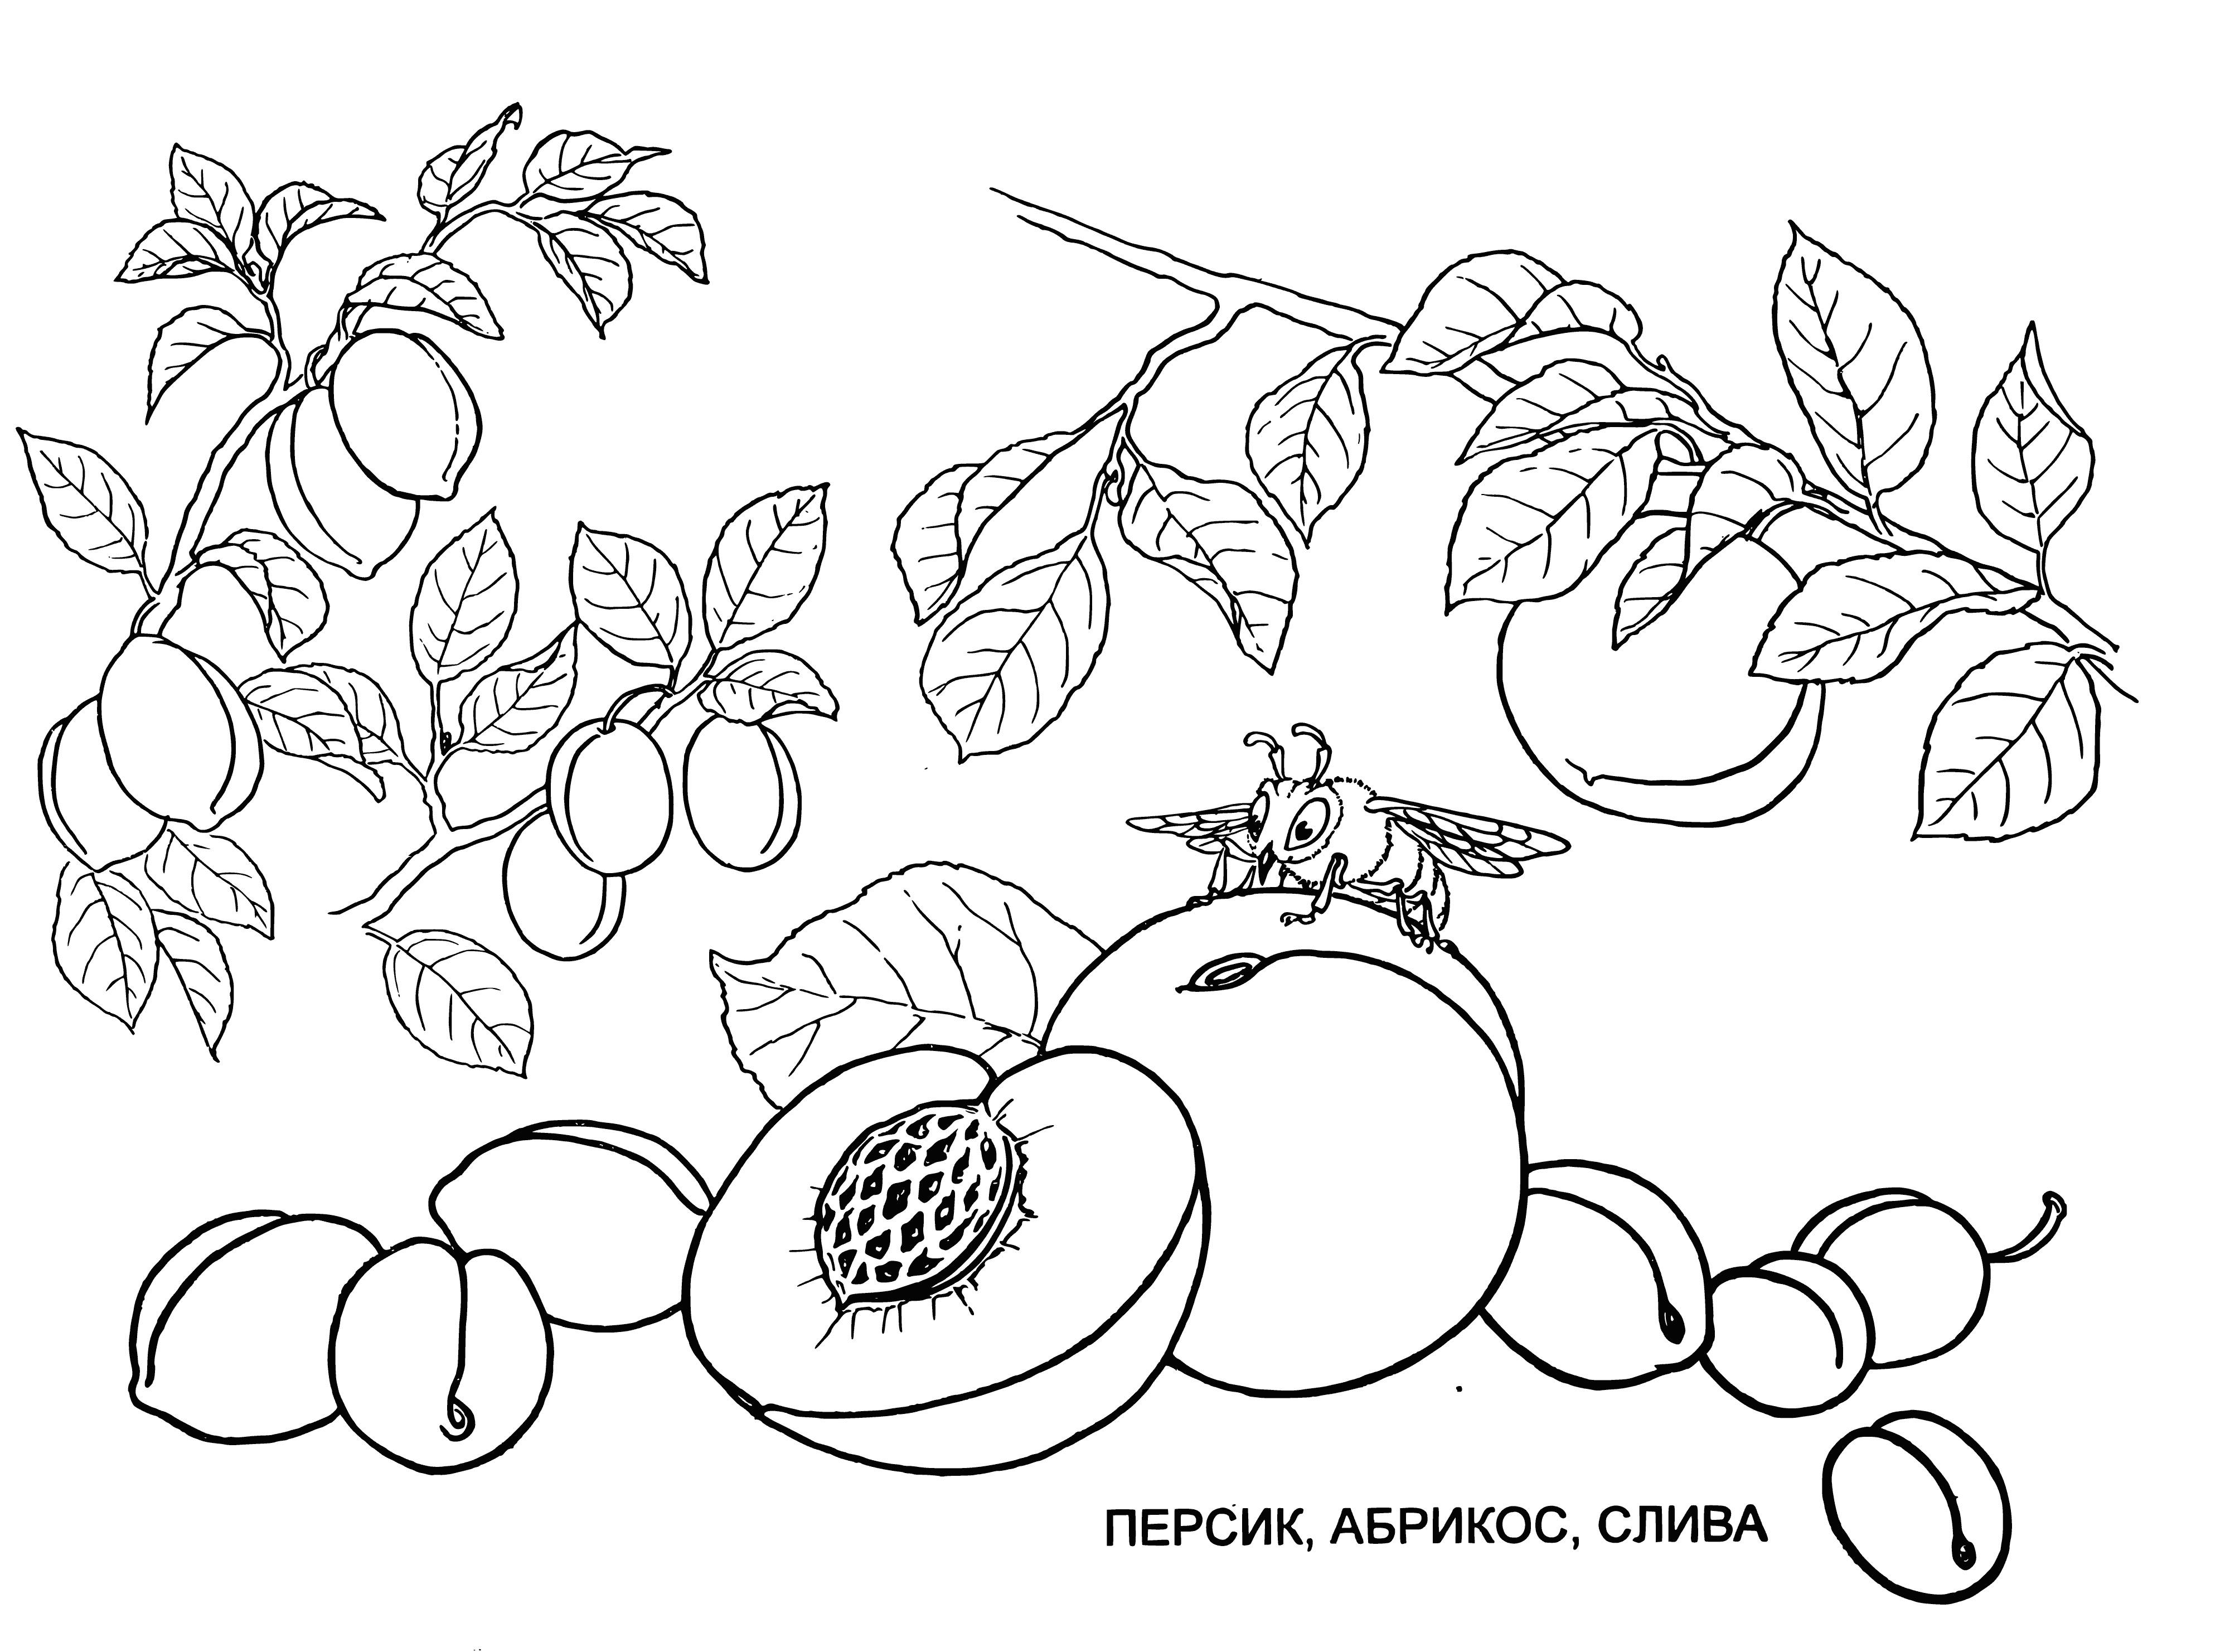 coloring page: Fruits with orange skin, yellow-orange flesh, and small pit: peaches, nectarines, and apricots.